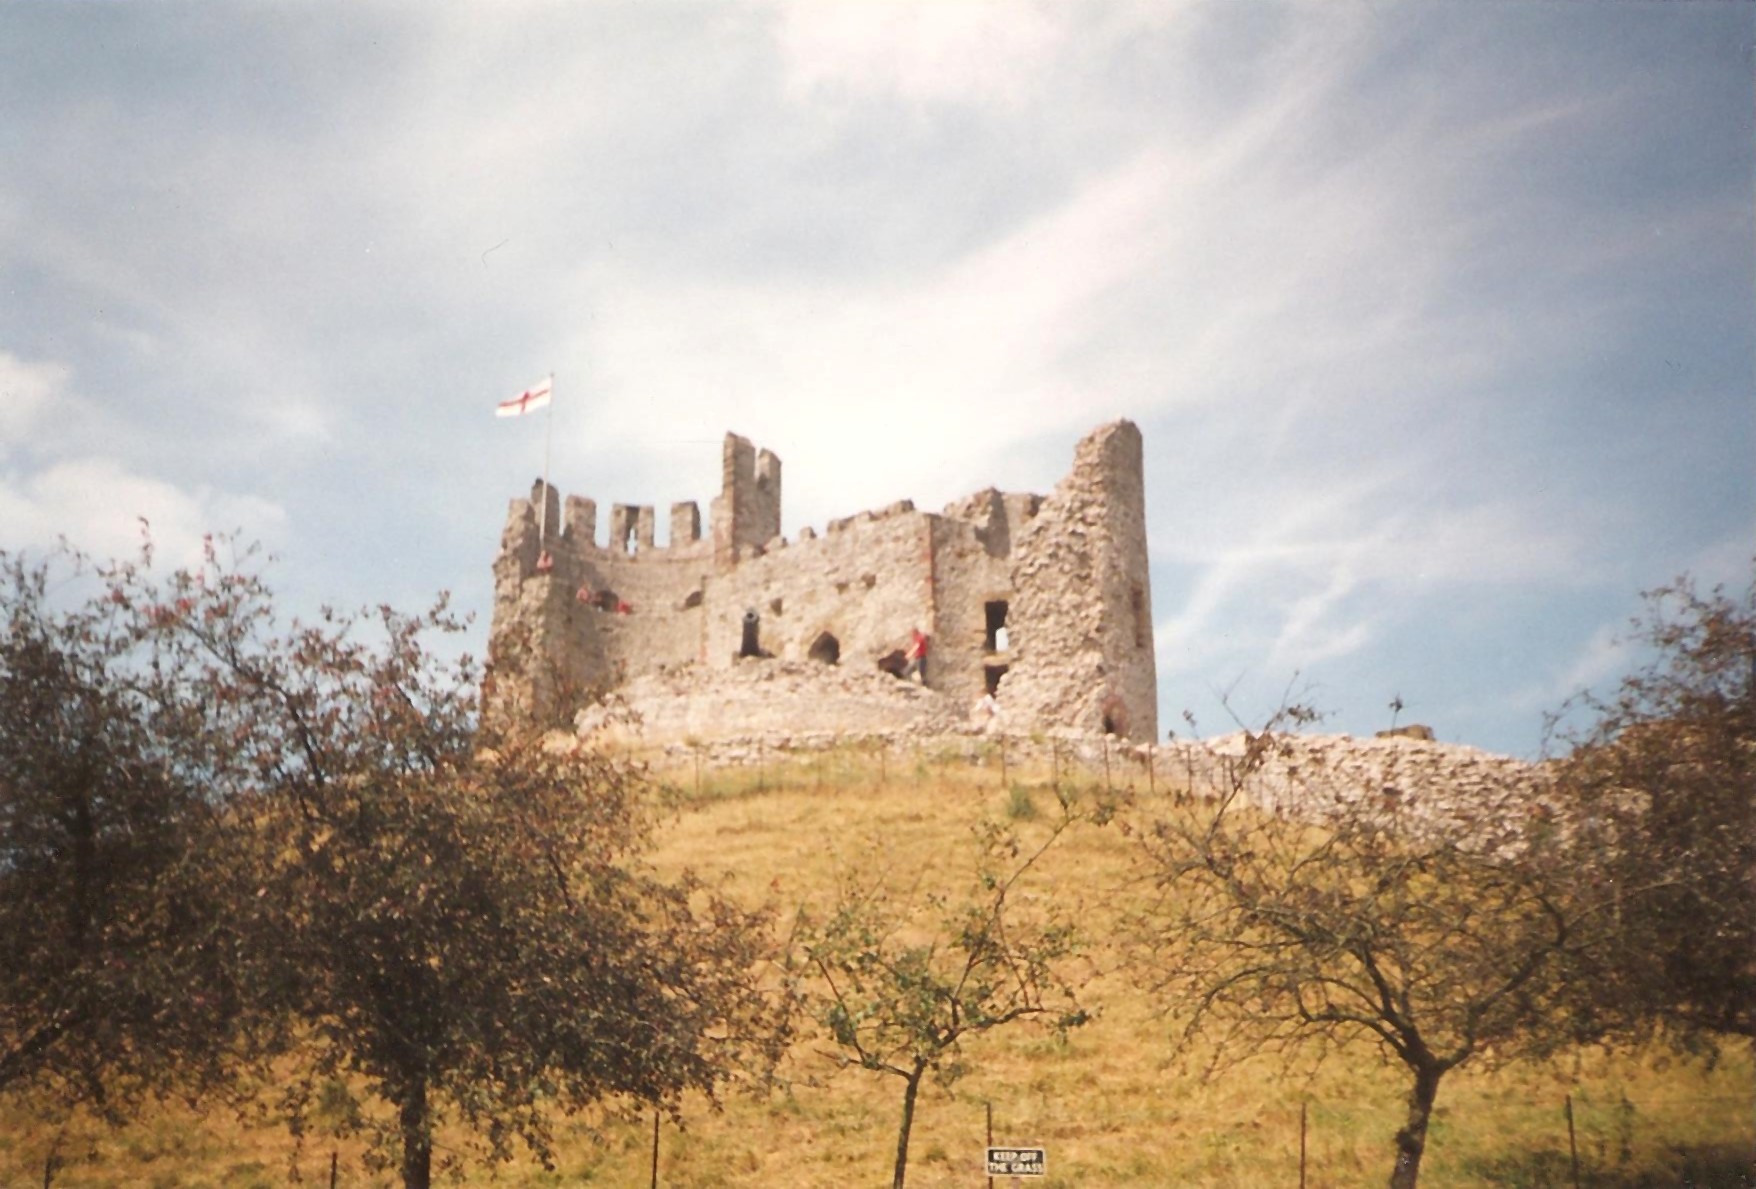 a large castle sitting on top of a hill surrounded by trees